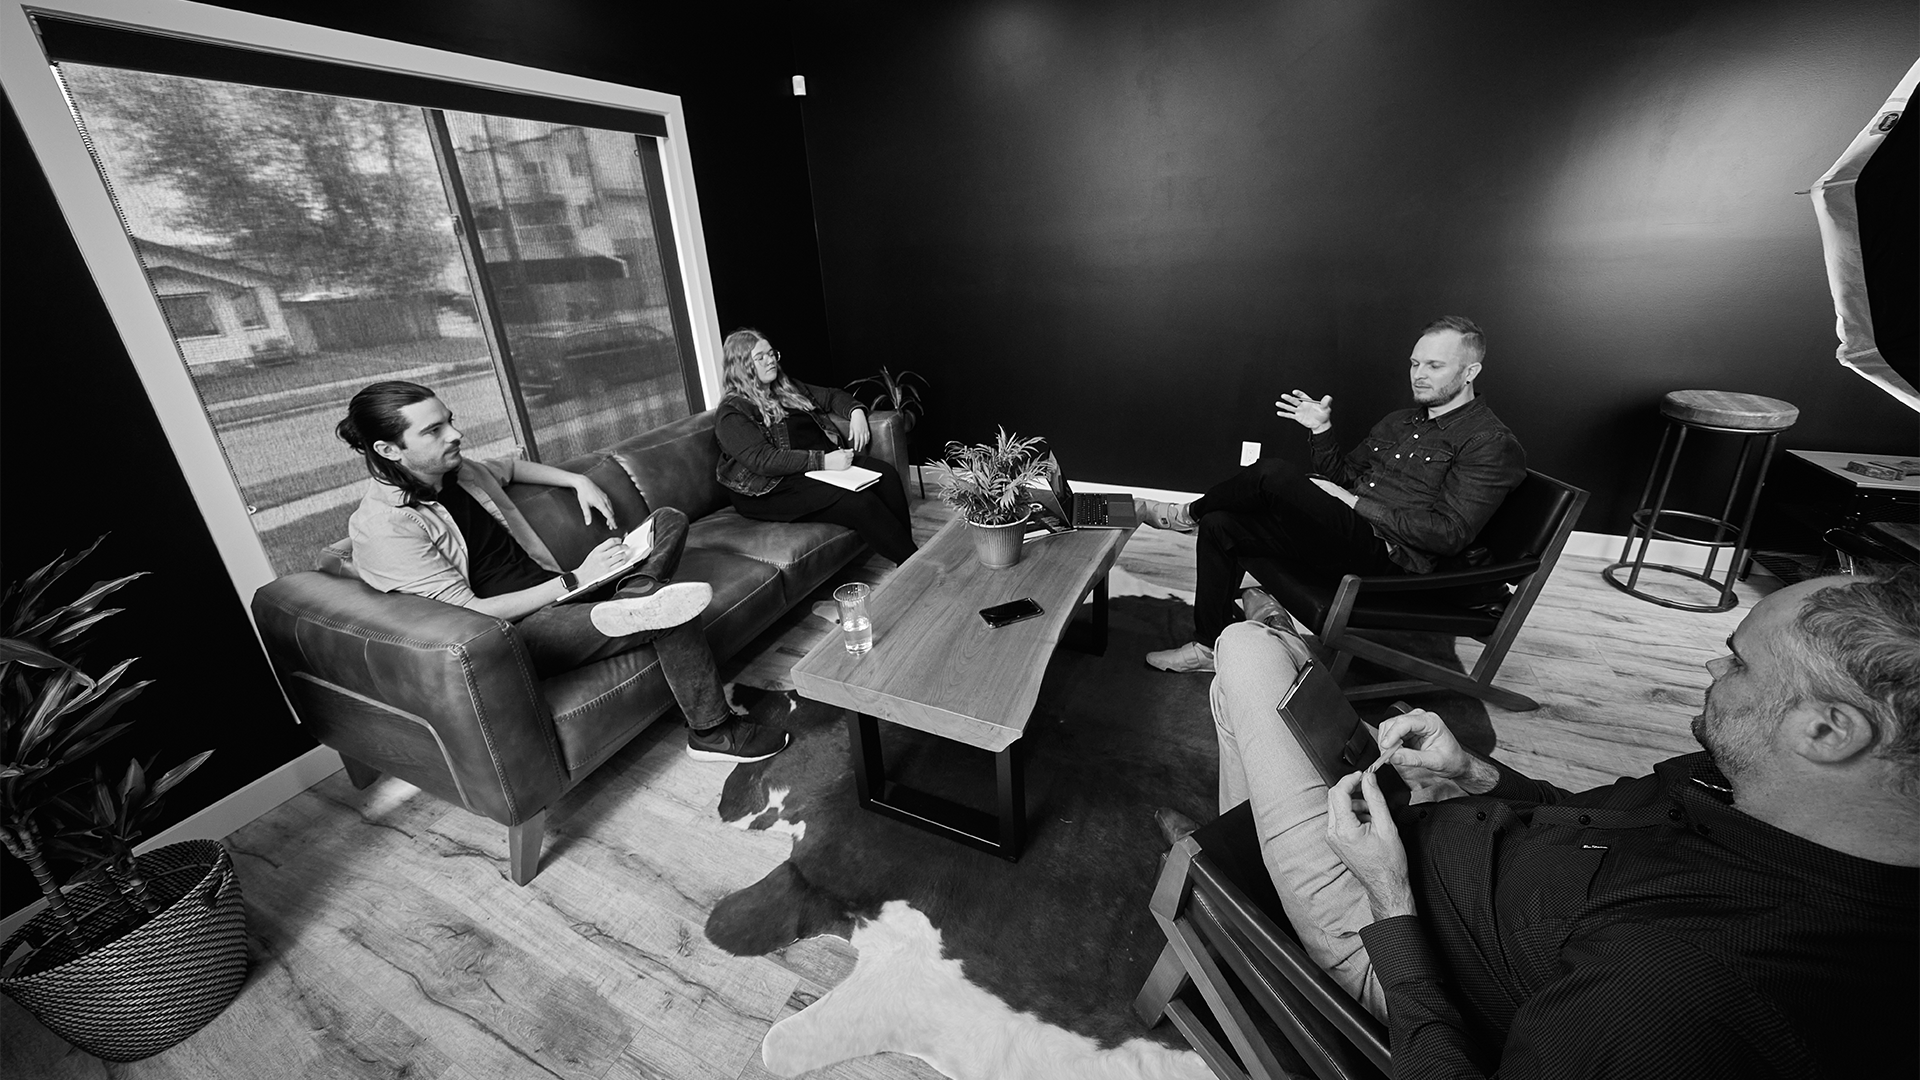 An image of the Coelement team meeting in a space with couches and a wooden coffee table.